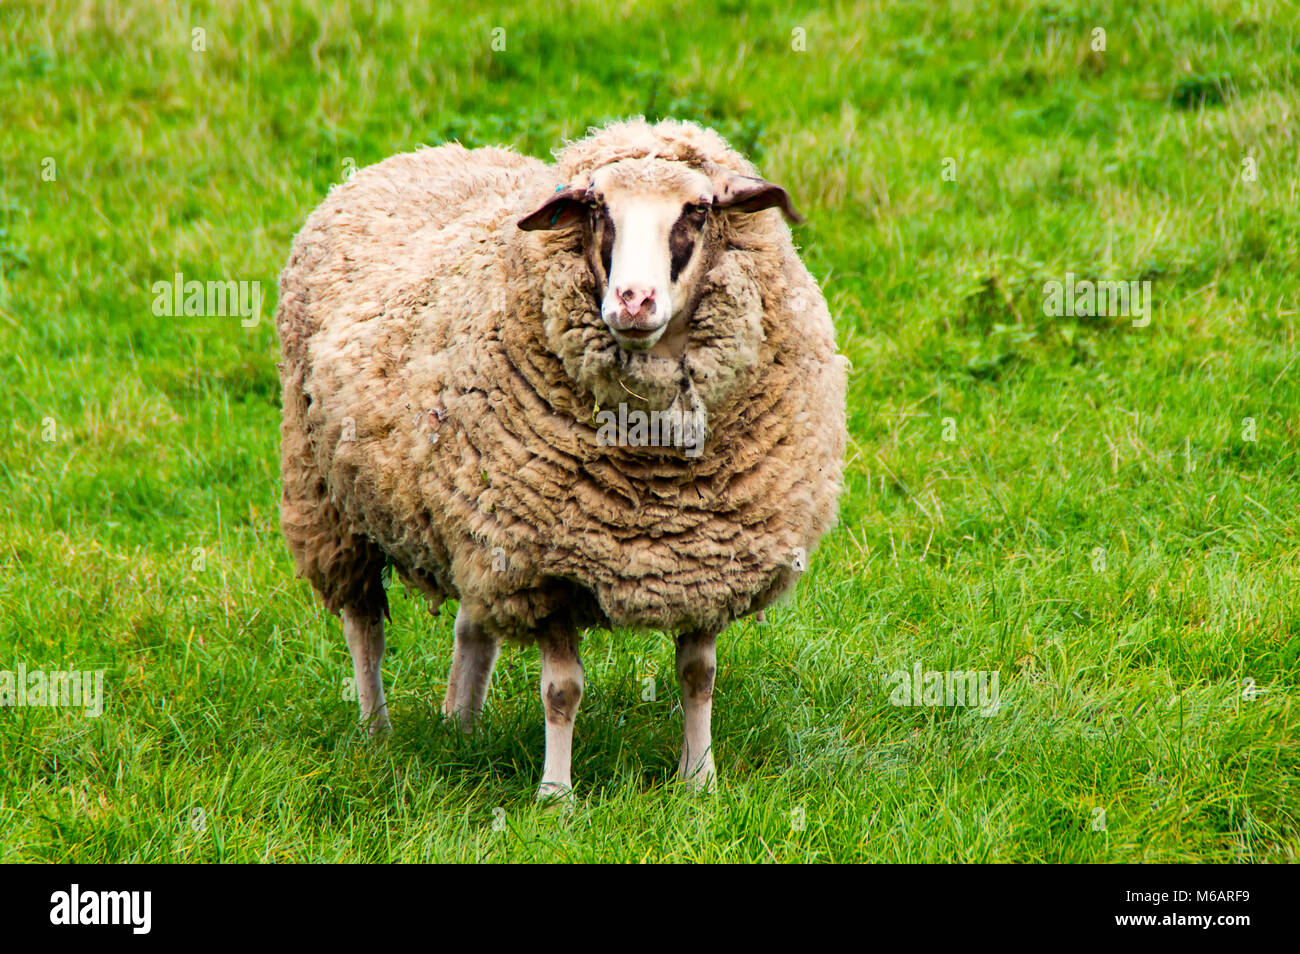 A big Sheep on the green gras Stock Photo